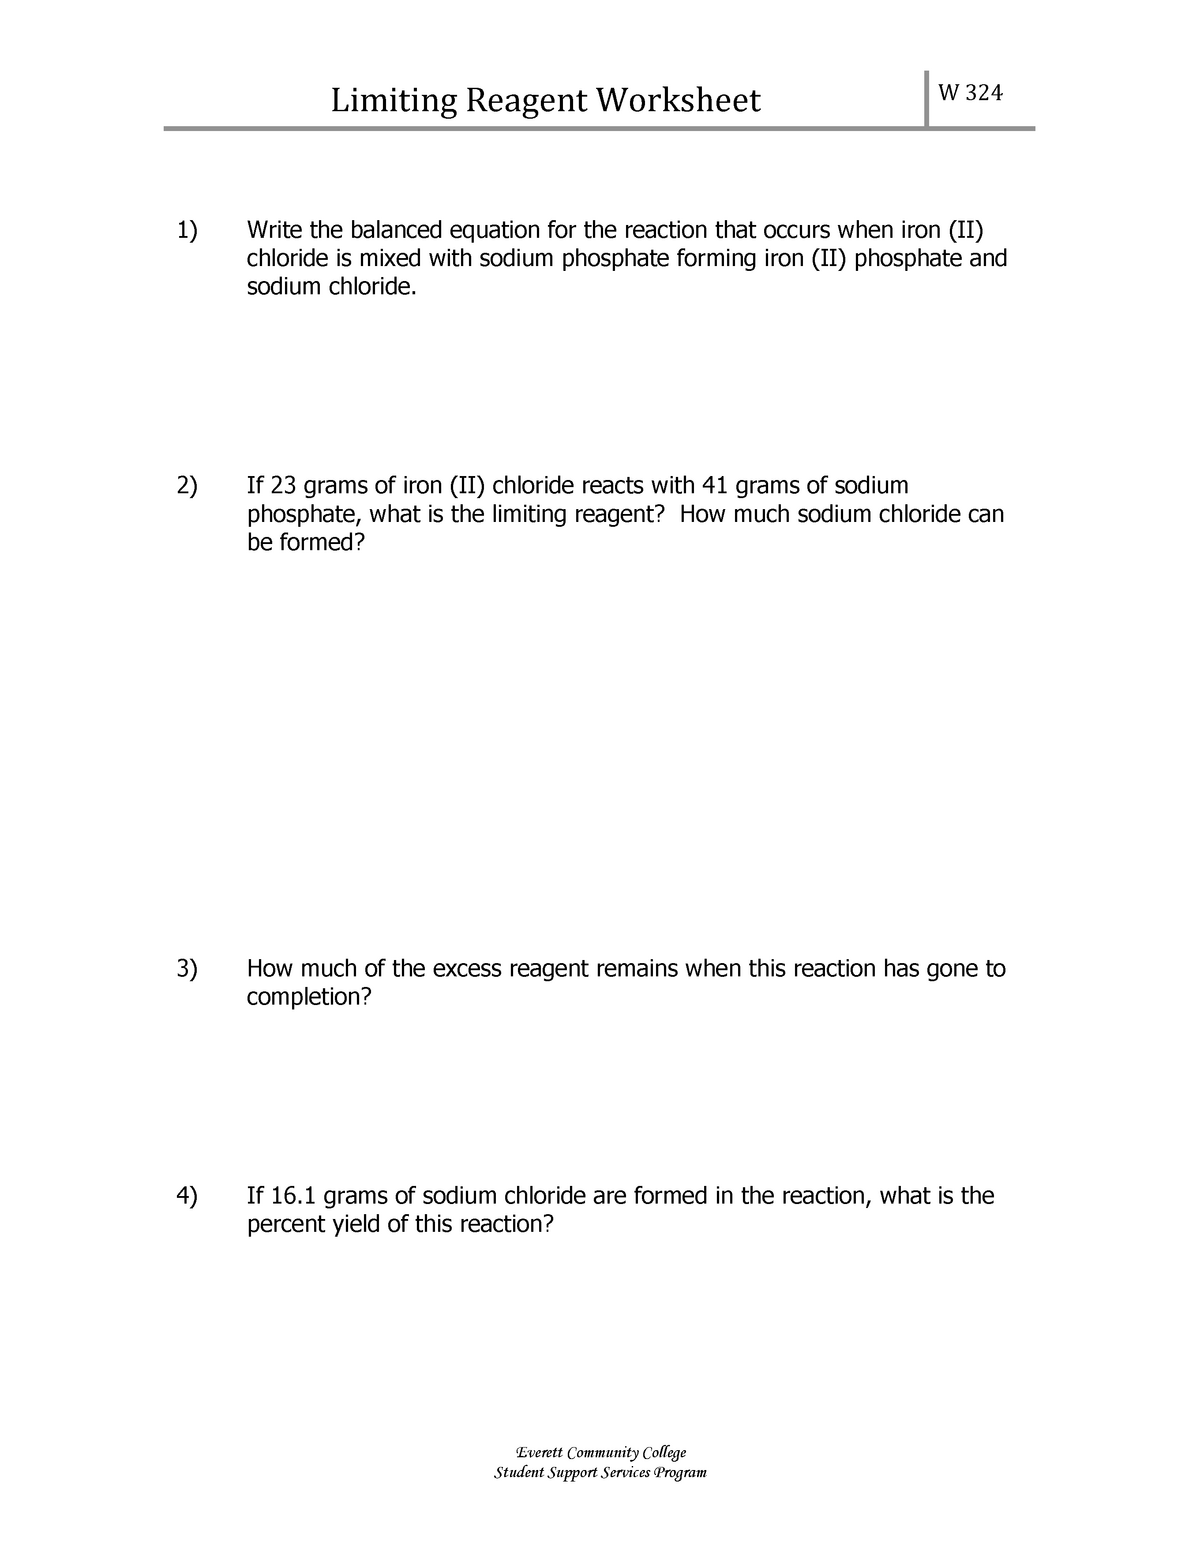 W20 limiting reagent worksheet - Limiting Reagent Worksheet W 20 With Limiting Reactant Worksheet Answers